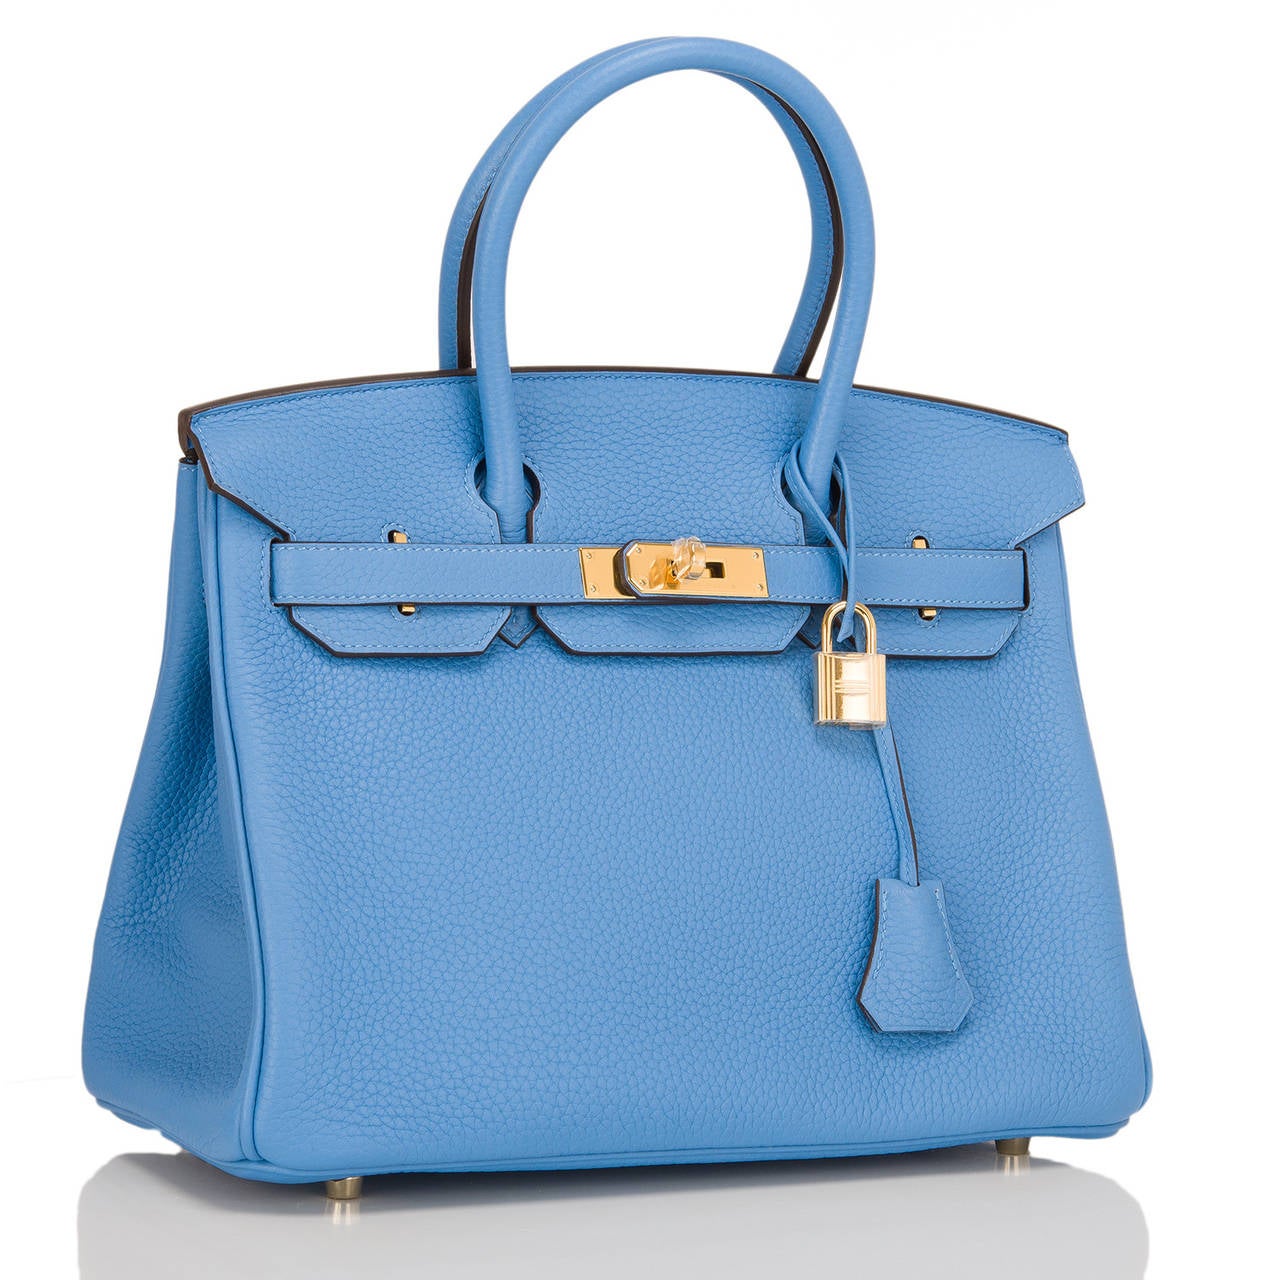 Hermes Blue Paradise Birkin 30cm in clemence leather with gold hardware.

The Hermes Birkin is the most coveted and the hardest to secure handbag in the world. Immediately recognizable by its shape, its thin straps with metal plates on the end of